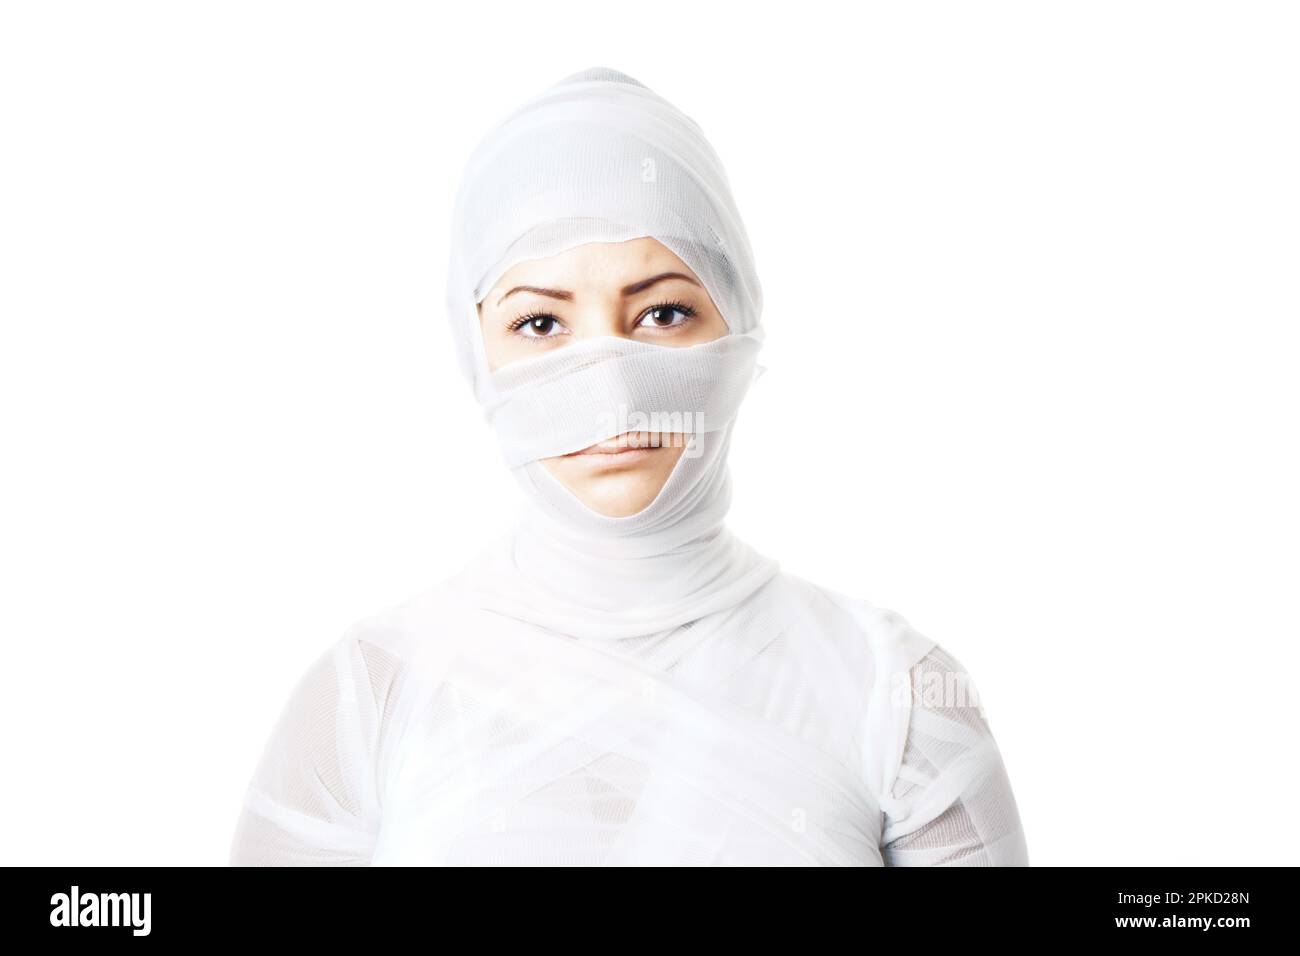 female cosmetic surgery patient wrapped in bandages looking like a mummy Stock Photo